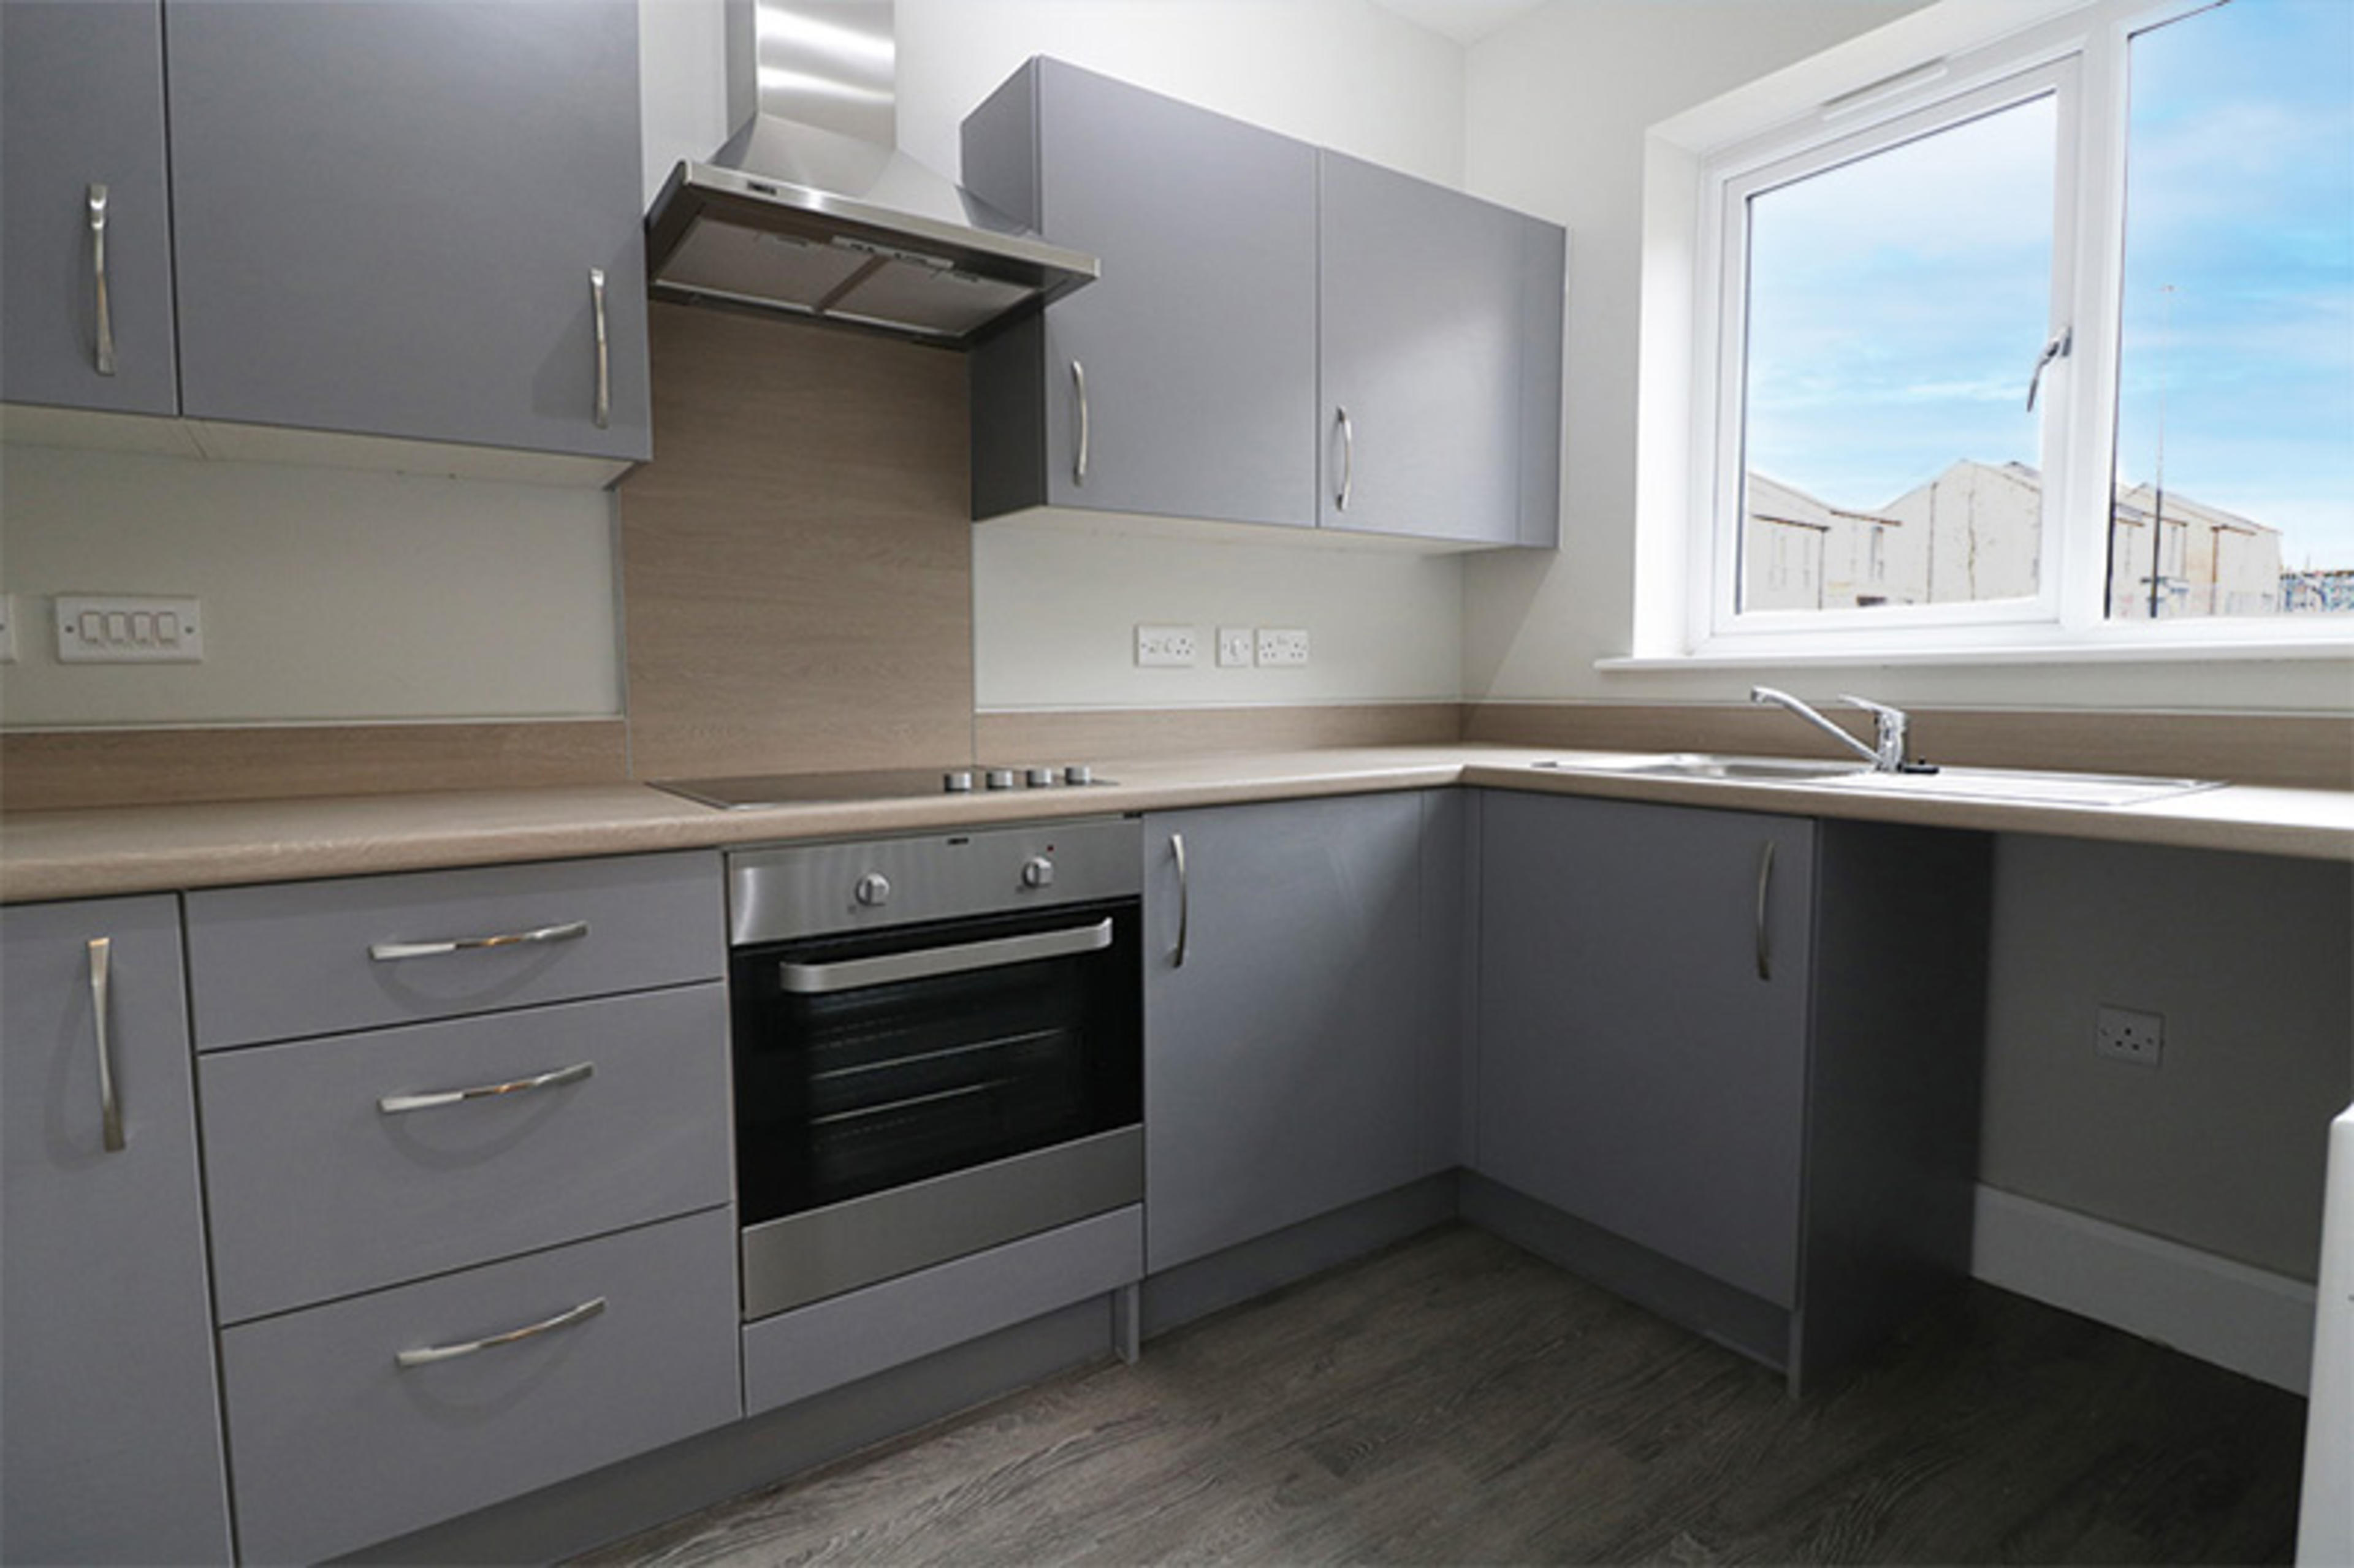 A blue-grey L-shaped kitchen with beechwood worktops and silver oven/cooker hood